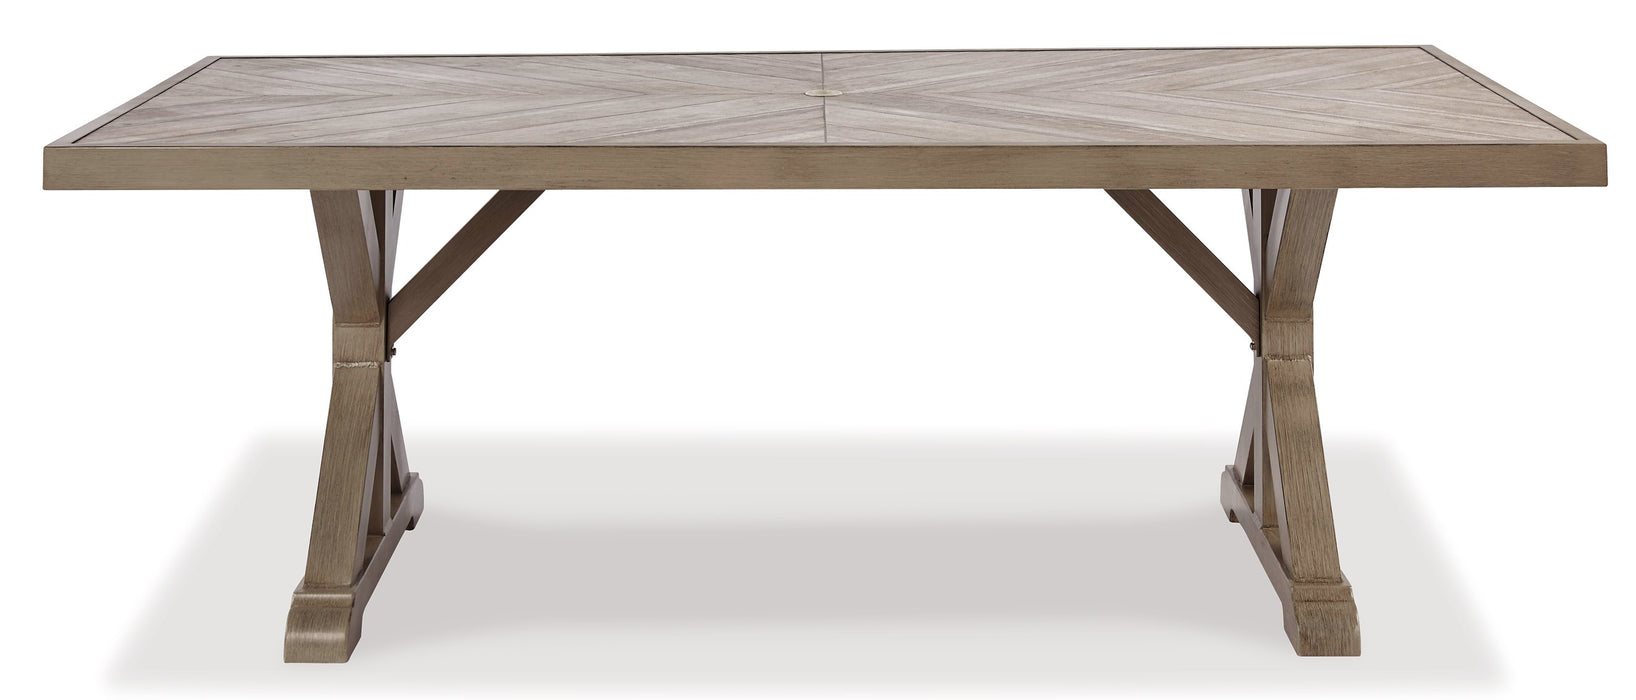 Beachcroft Outdoor Dining Table - All Brands Furniture (NJ)